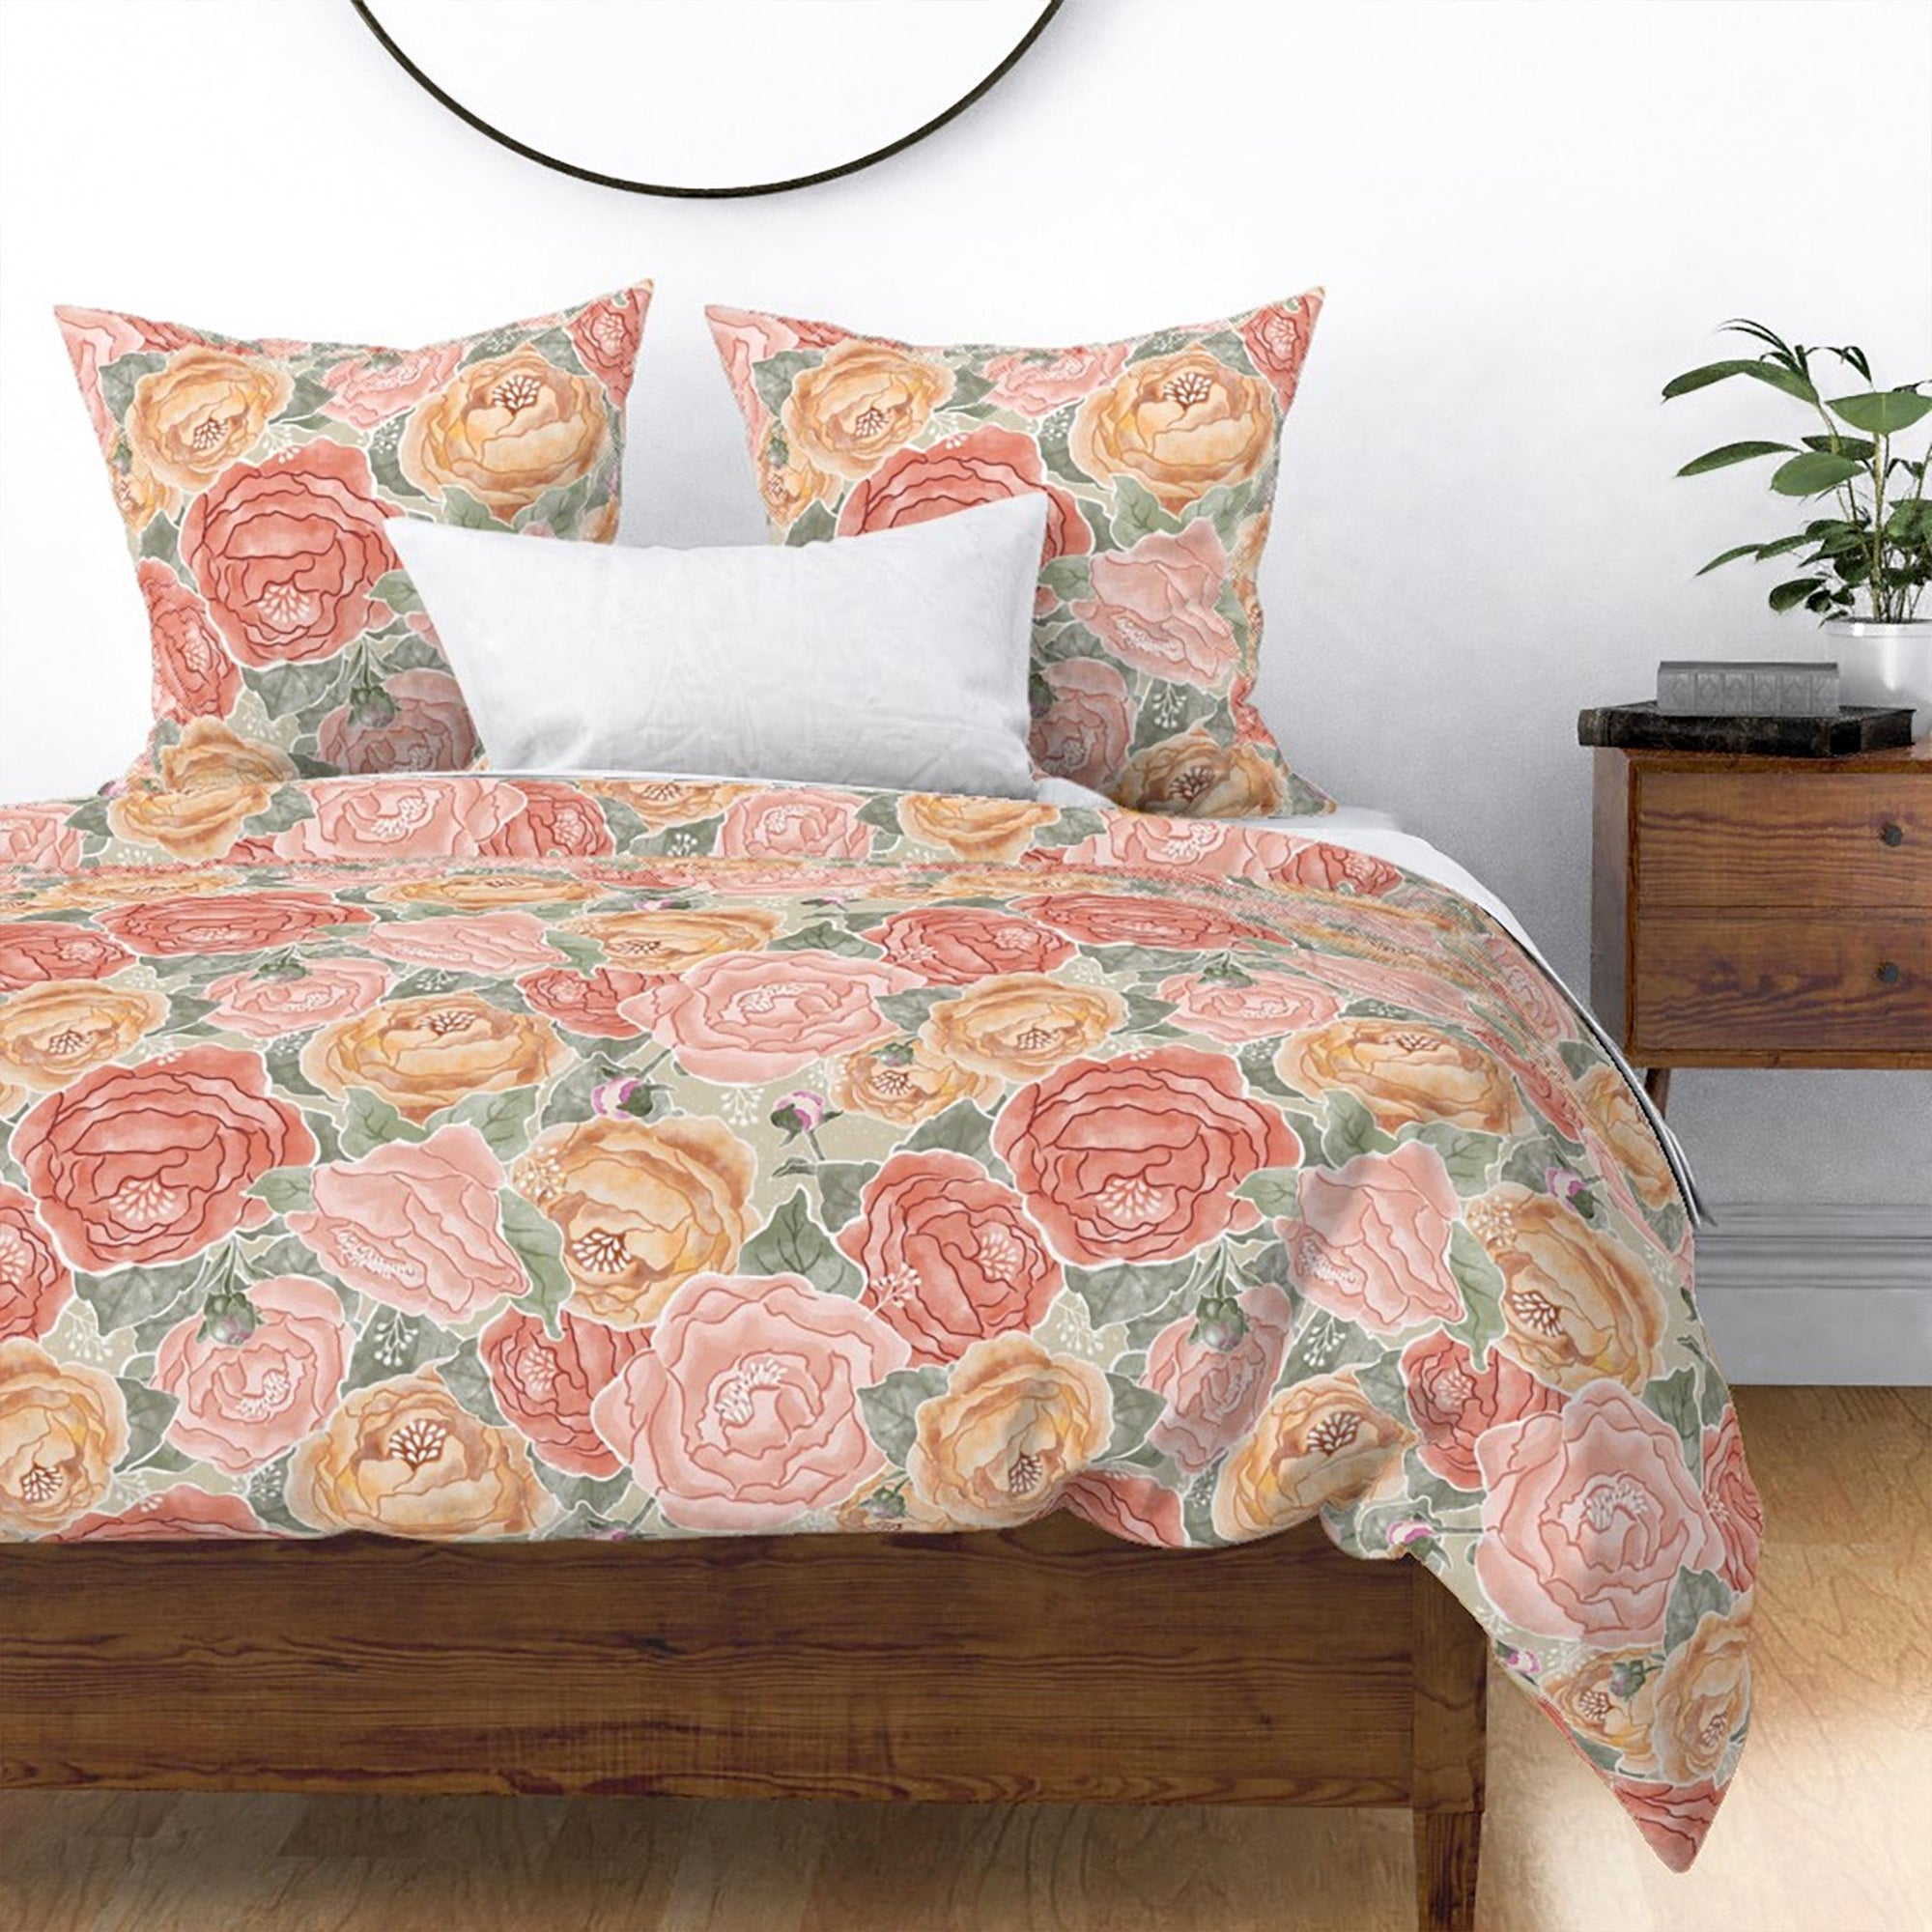 Pretty in Peony Bedding Collection with Amber Background duvet cover and shams